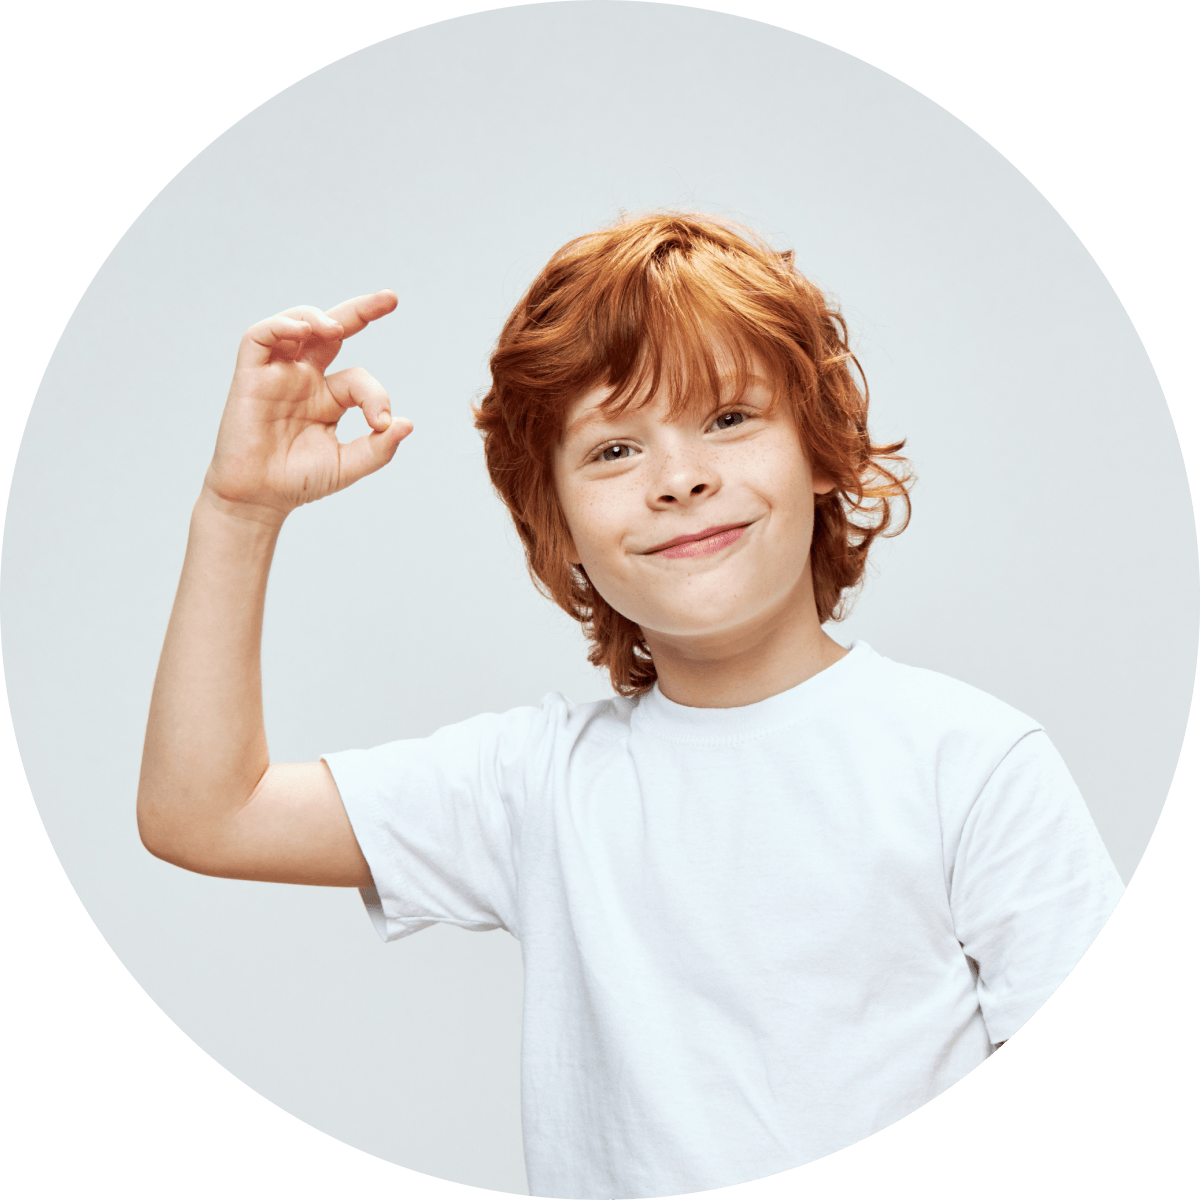 Smiling child with white t-shirt, showing OK sign